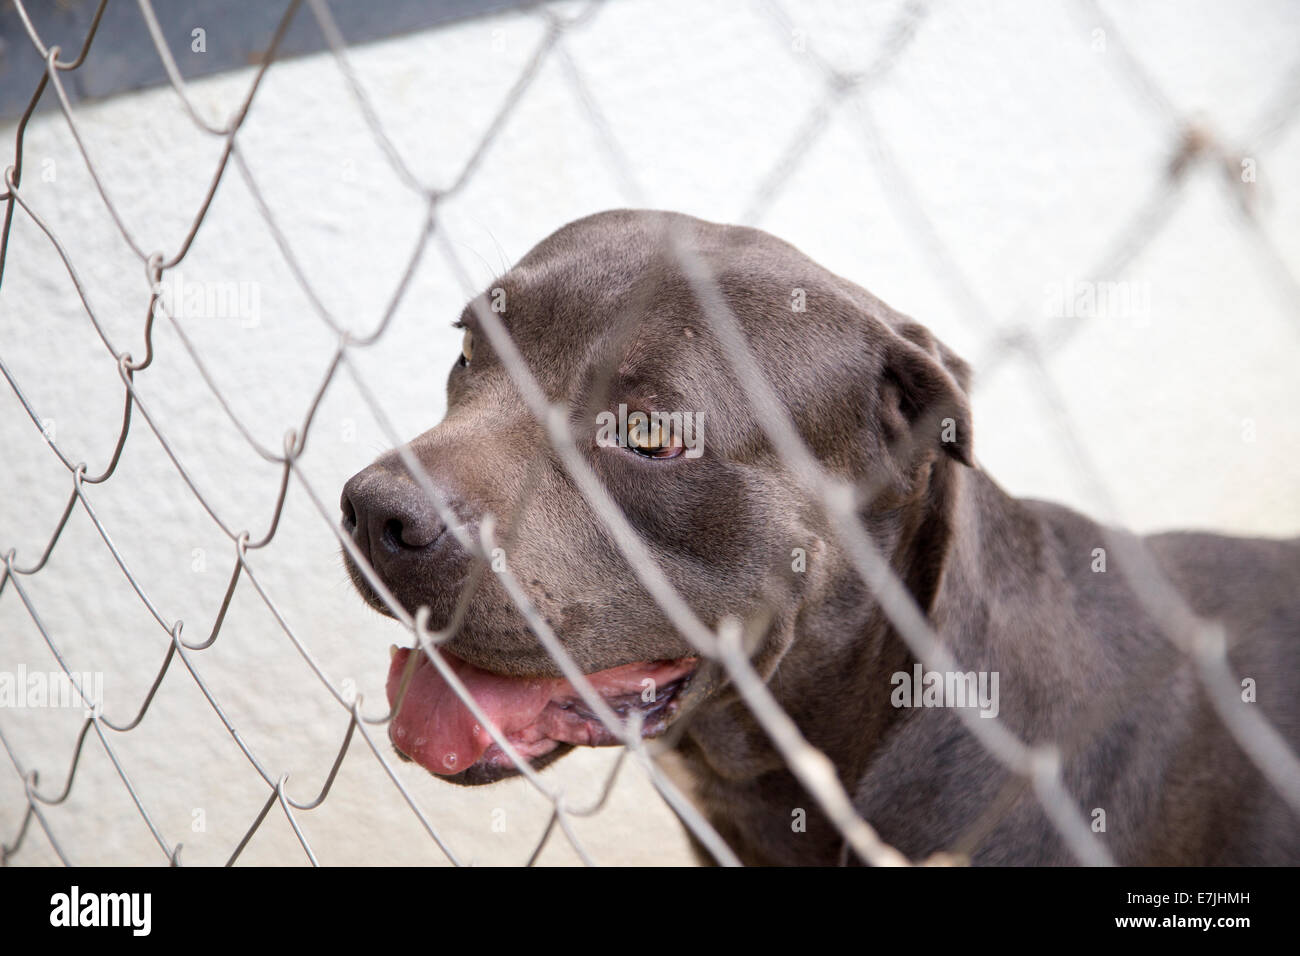 Black Dog Canne Corso Looking out From Behind the Wire Mesh Stock Photo